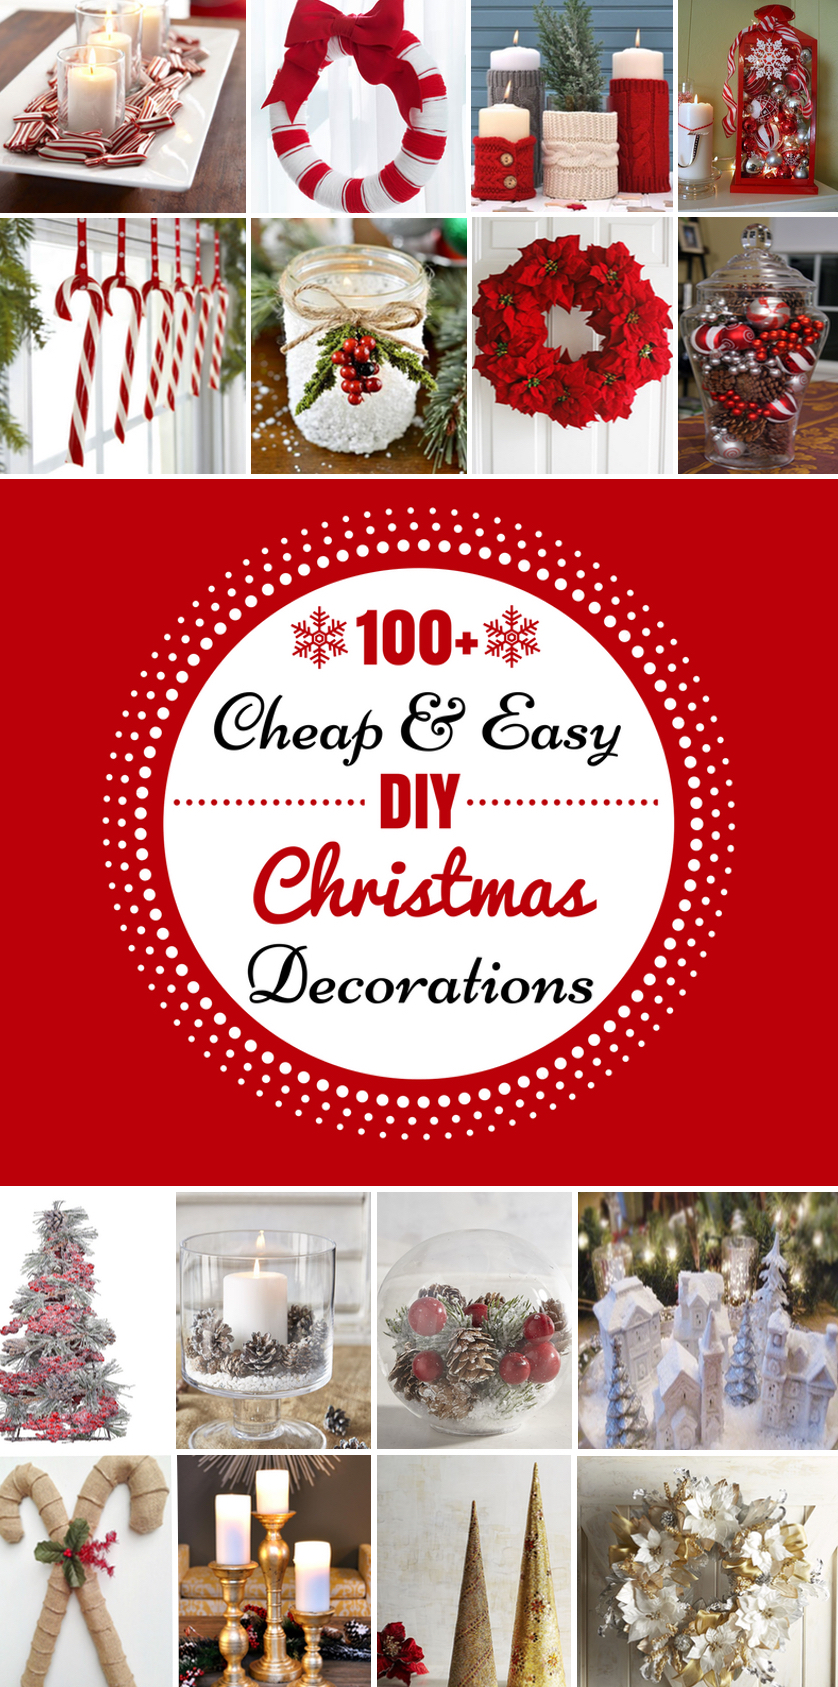 100 Cheap & Easy DIY Christmas Decorations  Prudent Penny Pincher